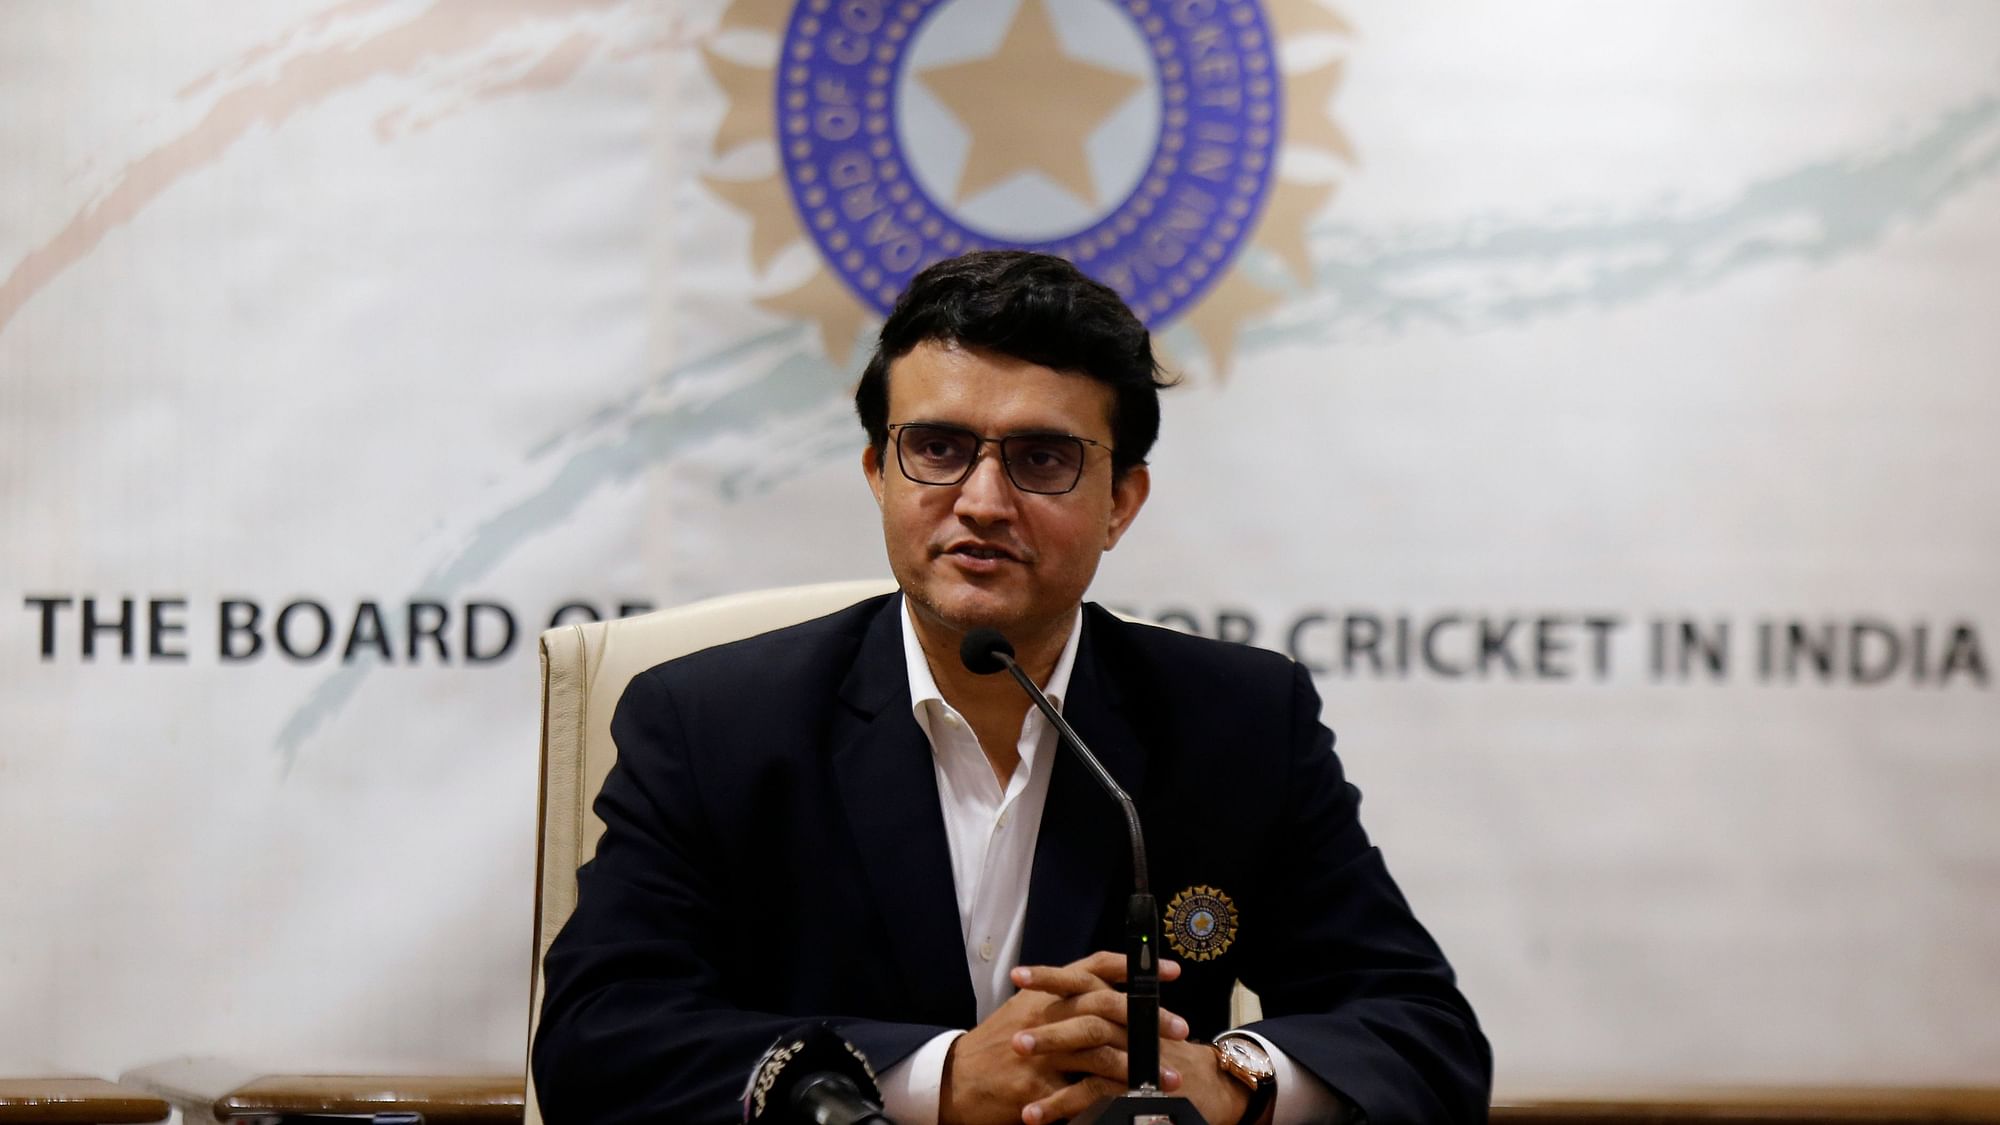 Sourav Ganguly spearheaded the decision to play India’s first day-night Test.